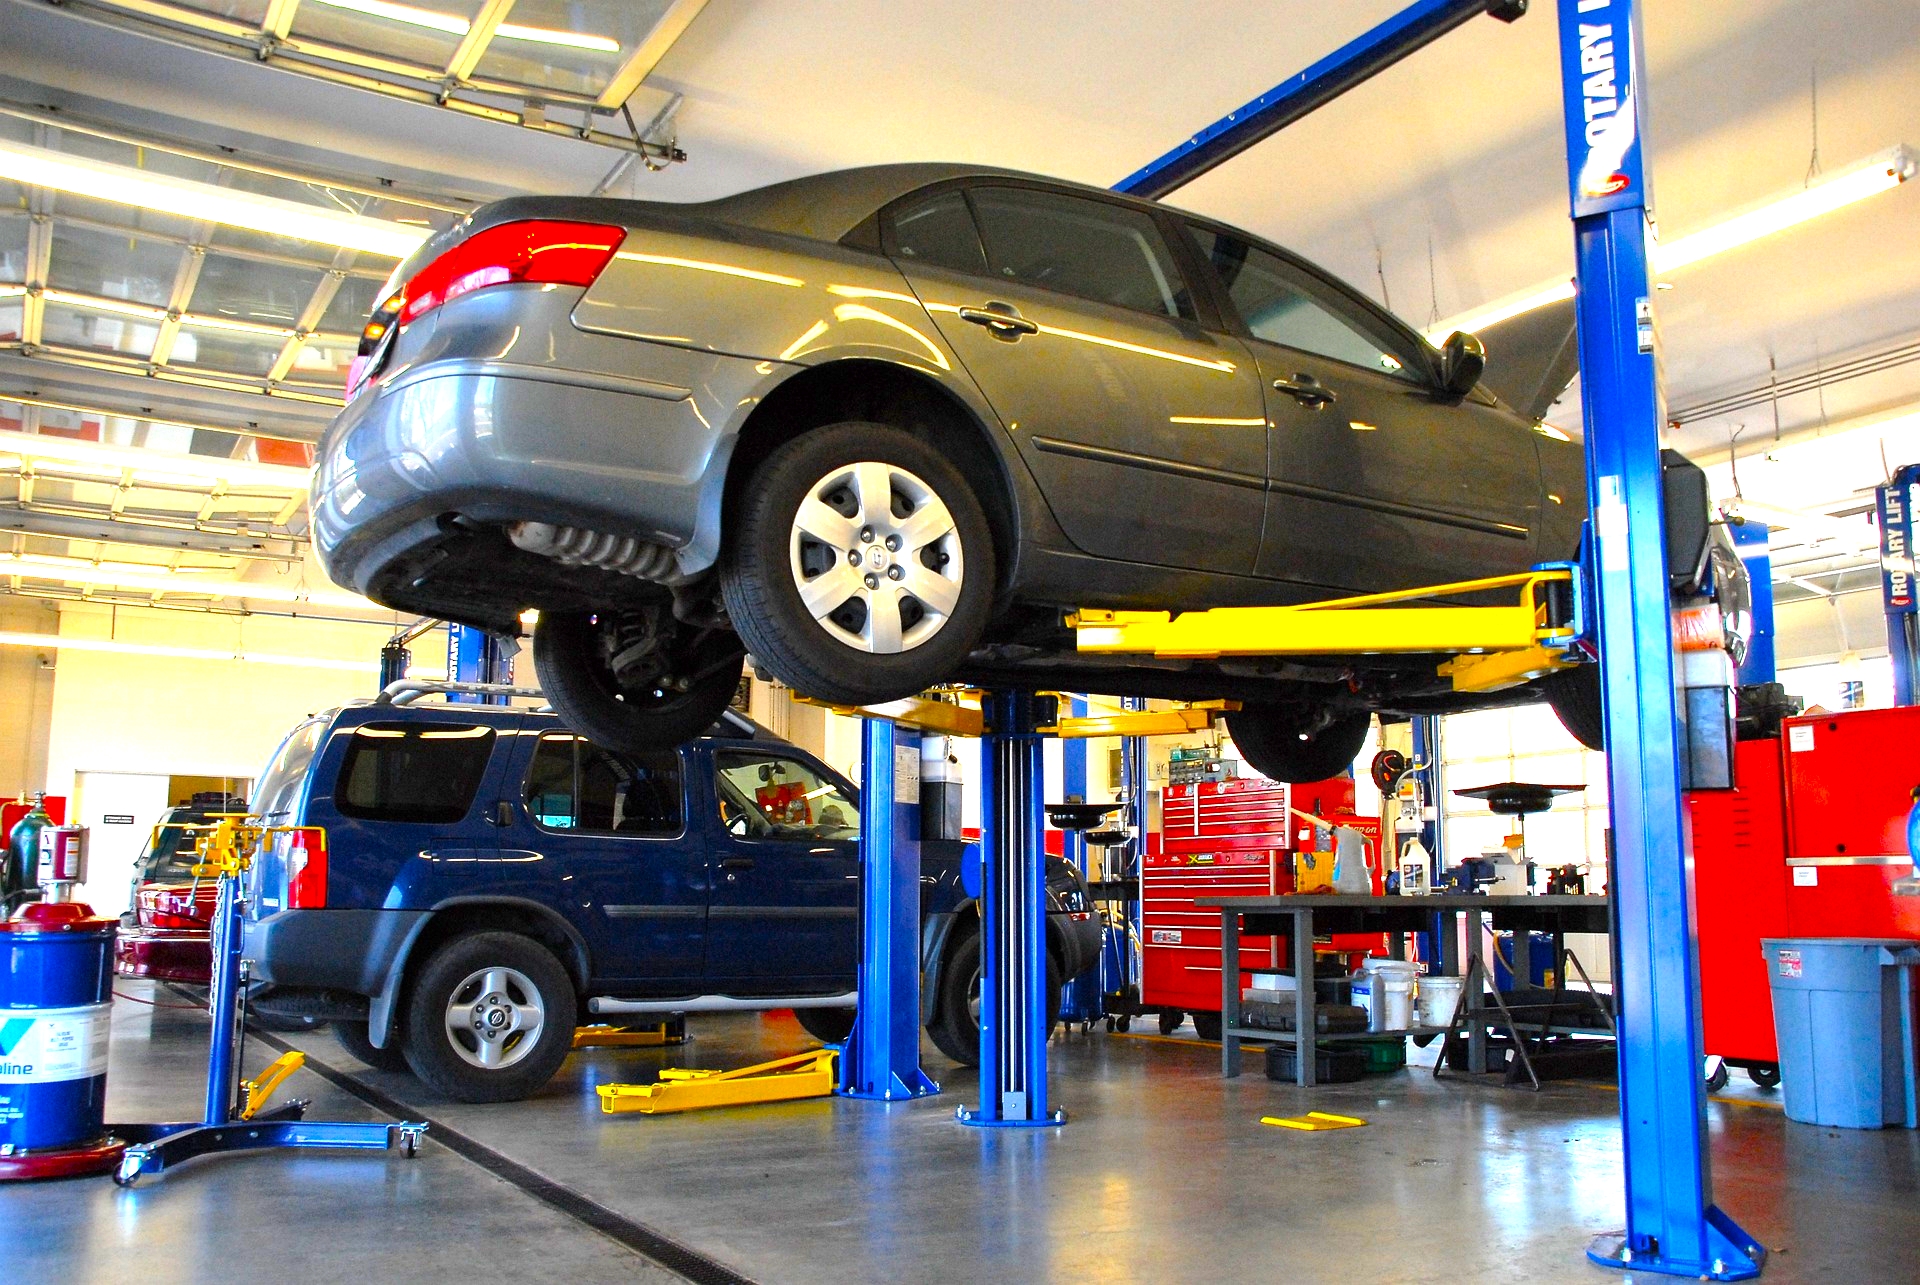 TOP 5 MUST HAVE TOOLS - Auto Body Work/ Collision Repair